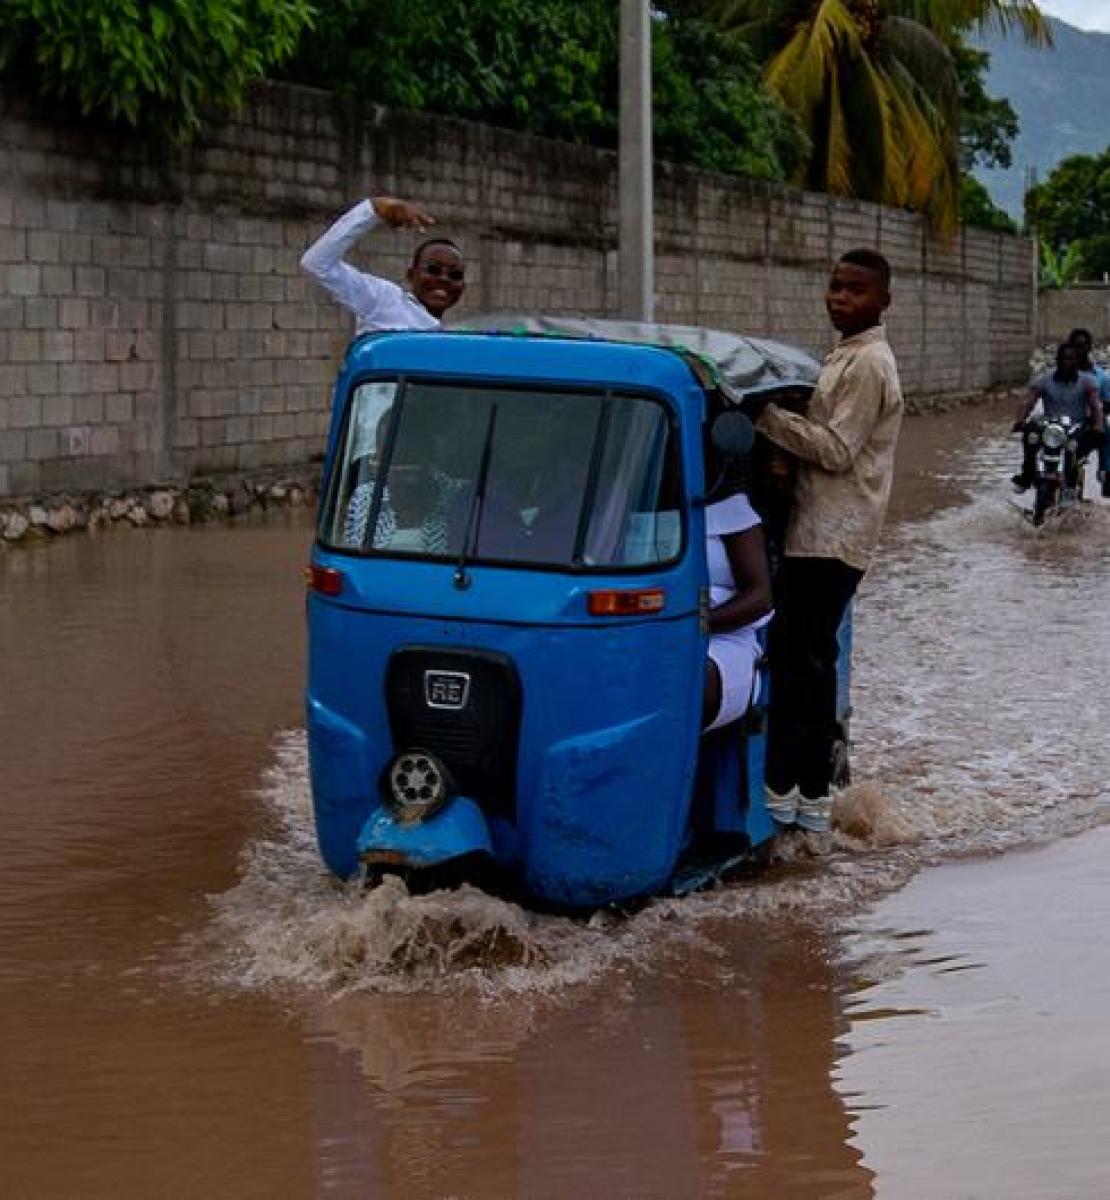 Two boys standing inside a motor vehicle that is stuck in the middle of a flood